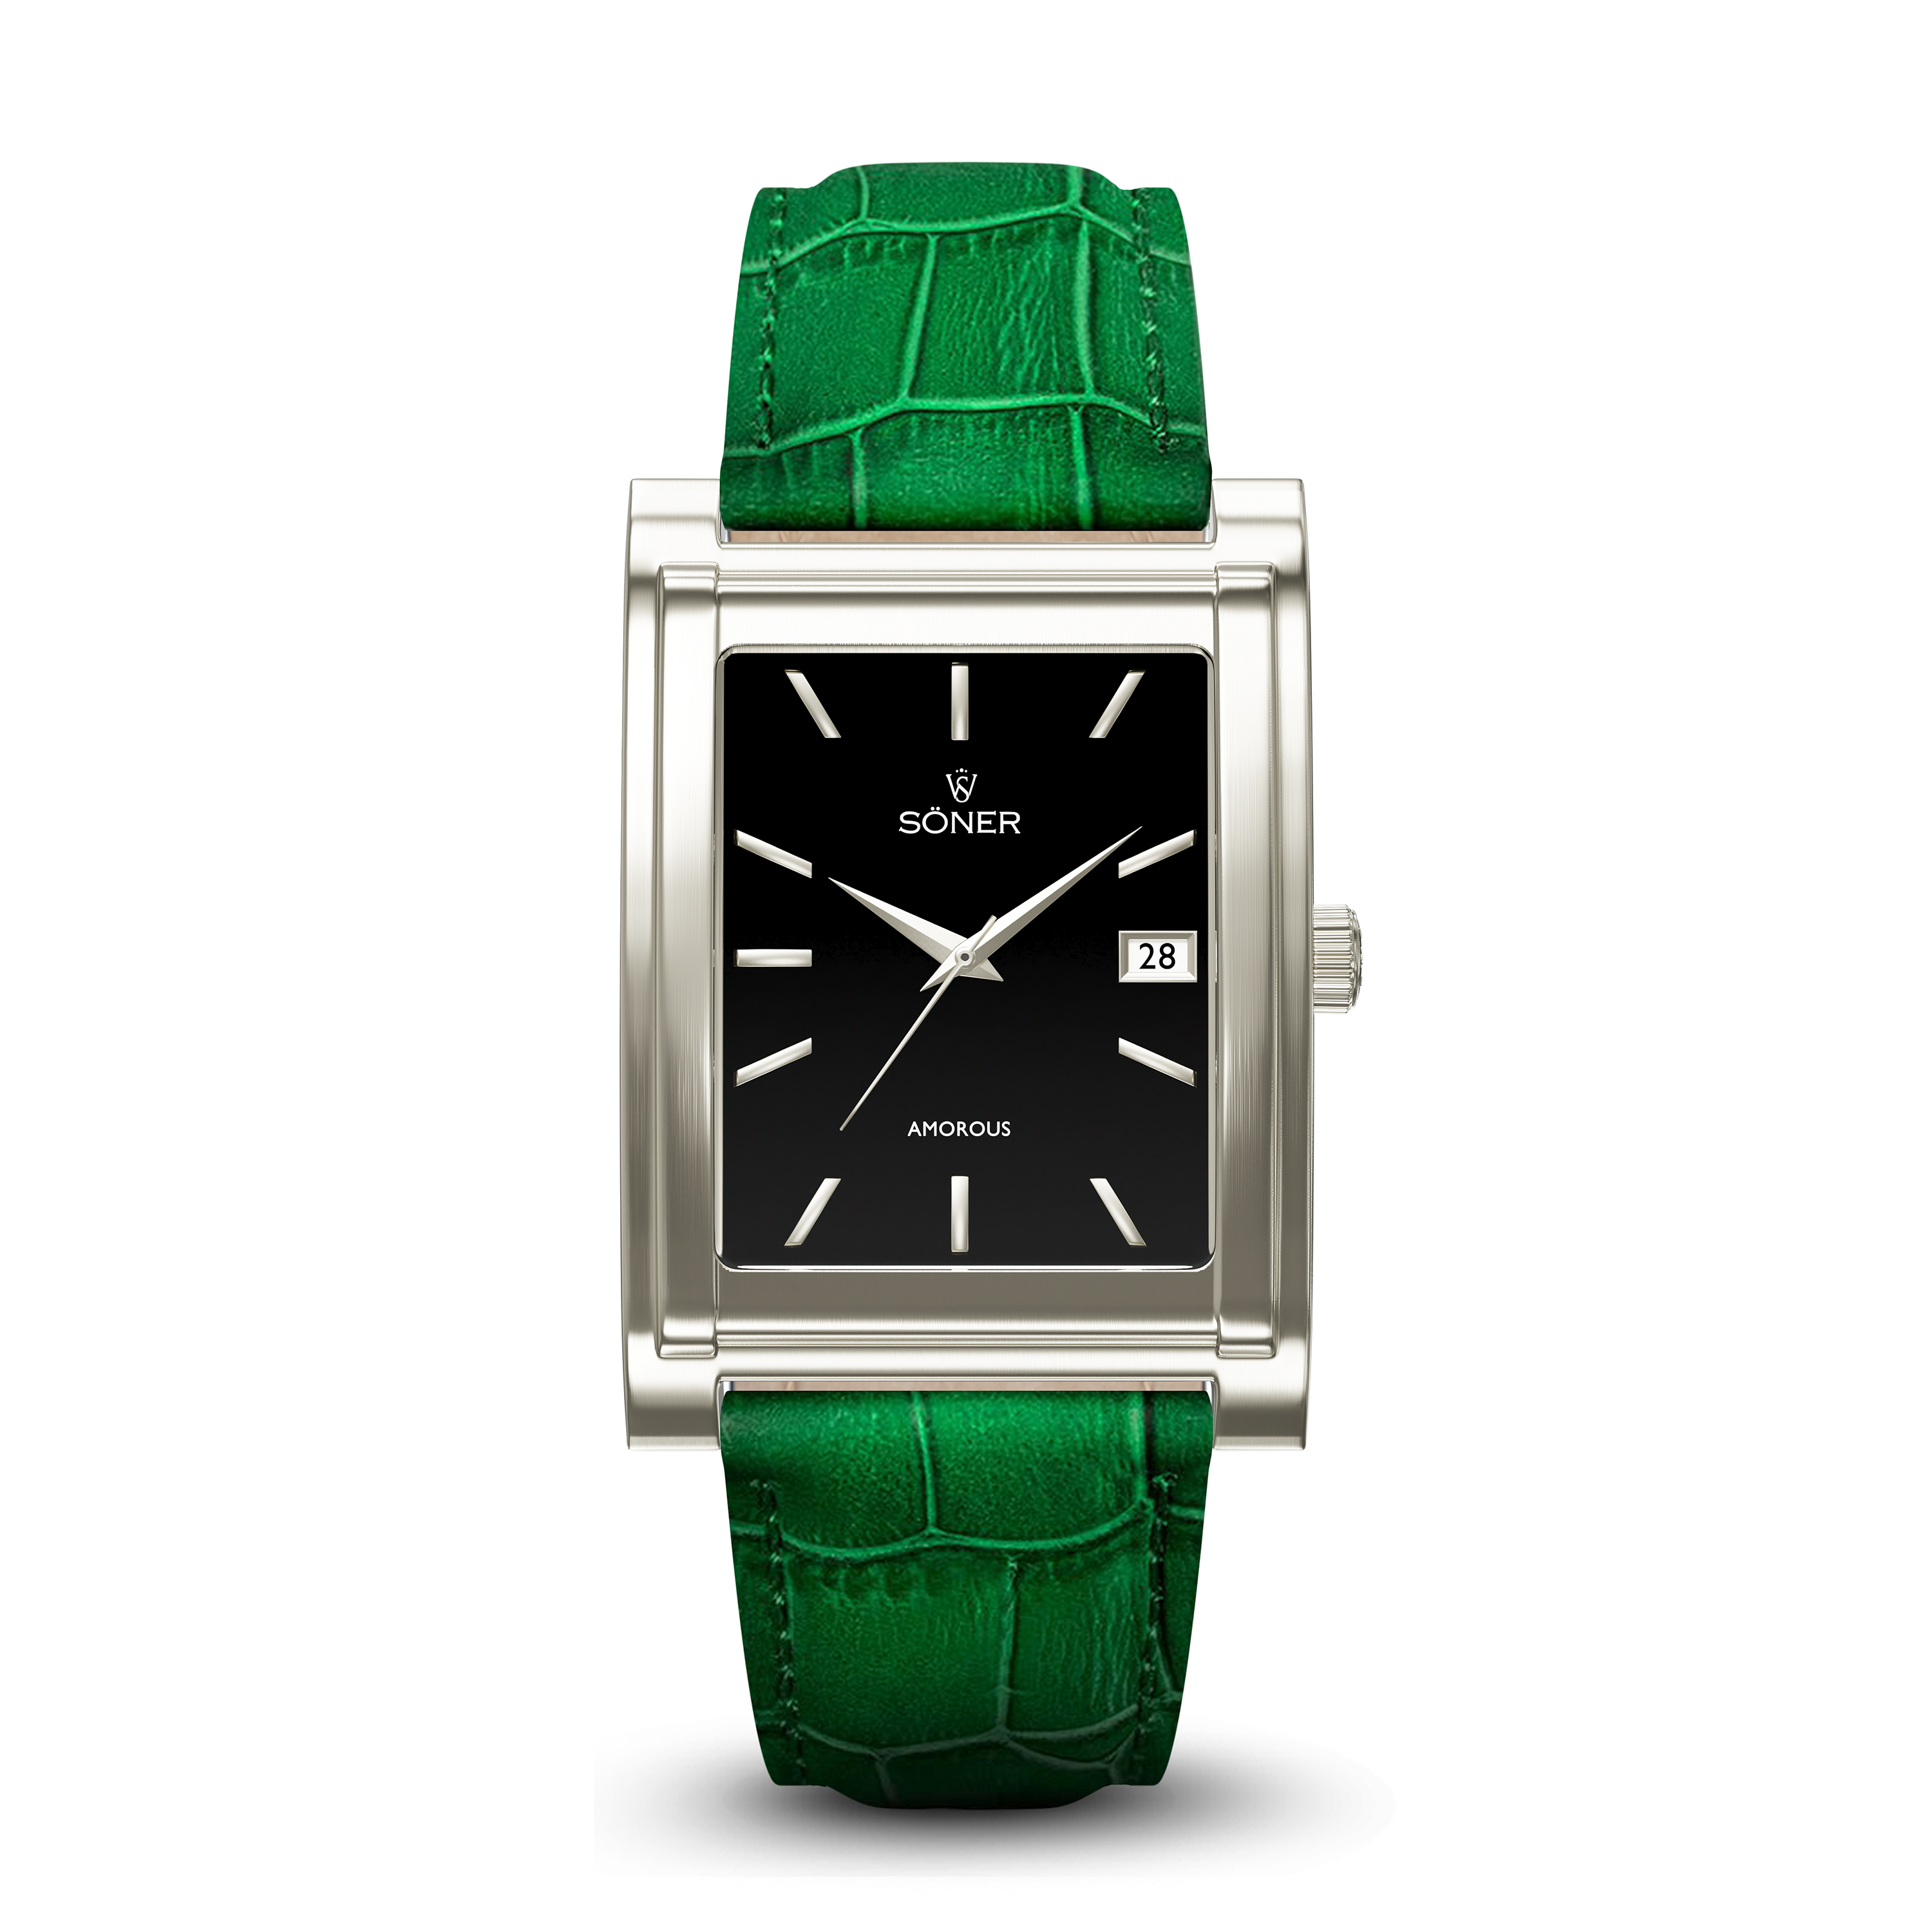 Square automatic watch, Amorous Sydney with black dial - green alligator pattern leather strap front view